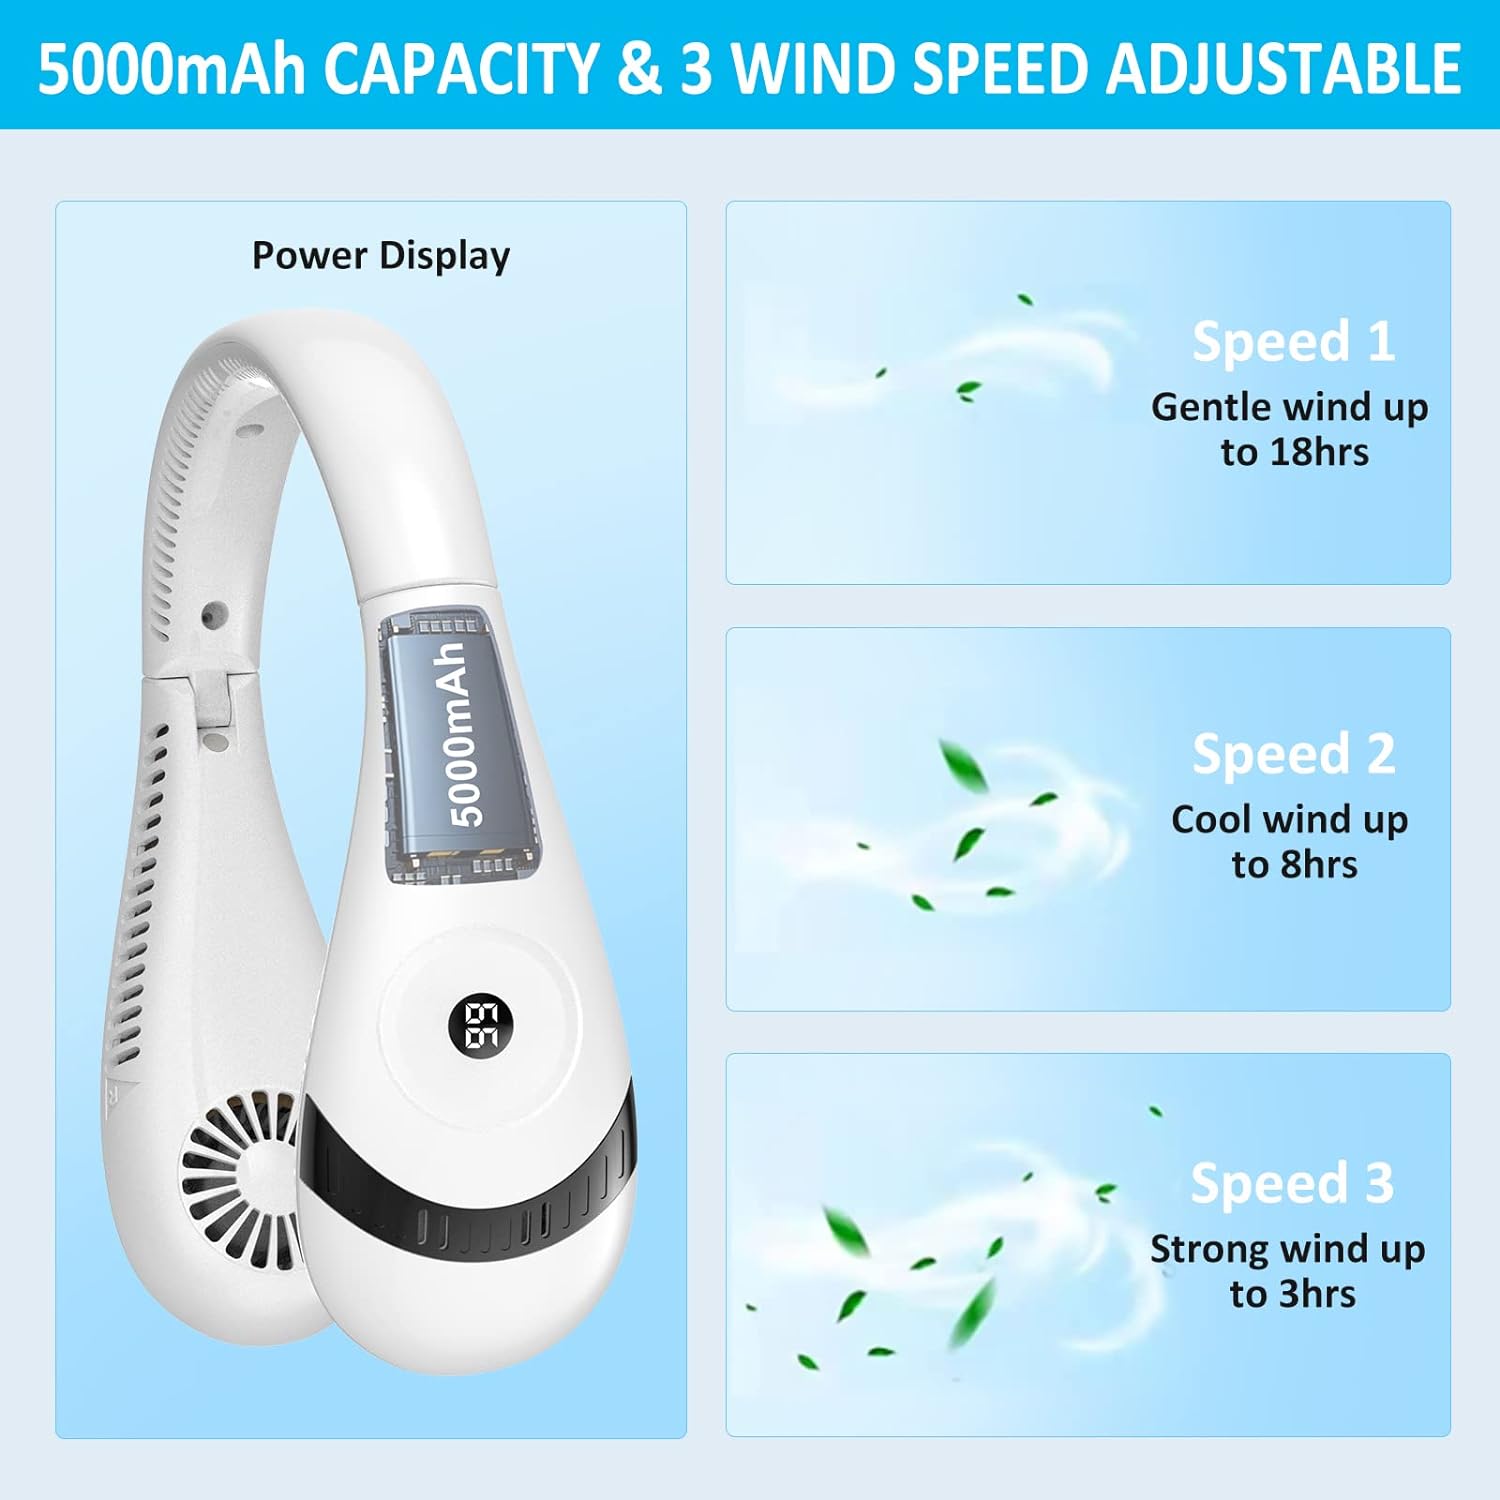 LED-Lighting-Neck-Fan-5000mAh-Foldable-Hands-Free-Bladeless-Wearable-Personal-Fans-Battery-Operated-USB-Rechargeable-LED-Power-Display-for-Outdoor-Travel-Camp-13